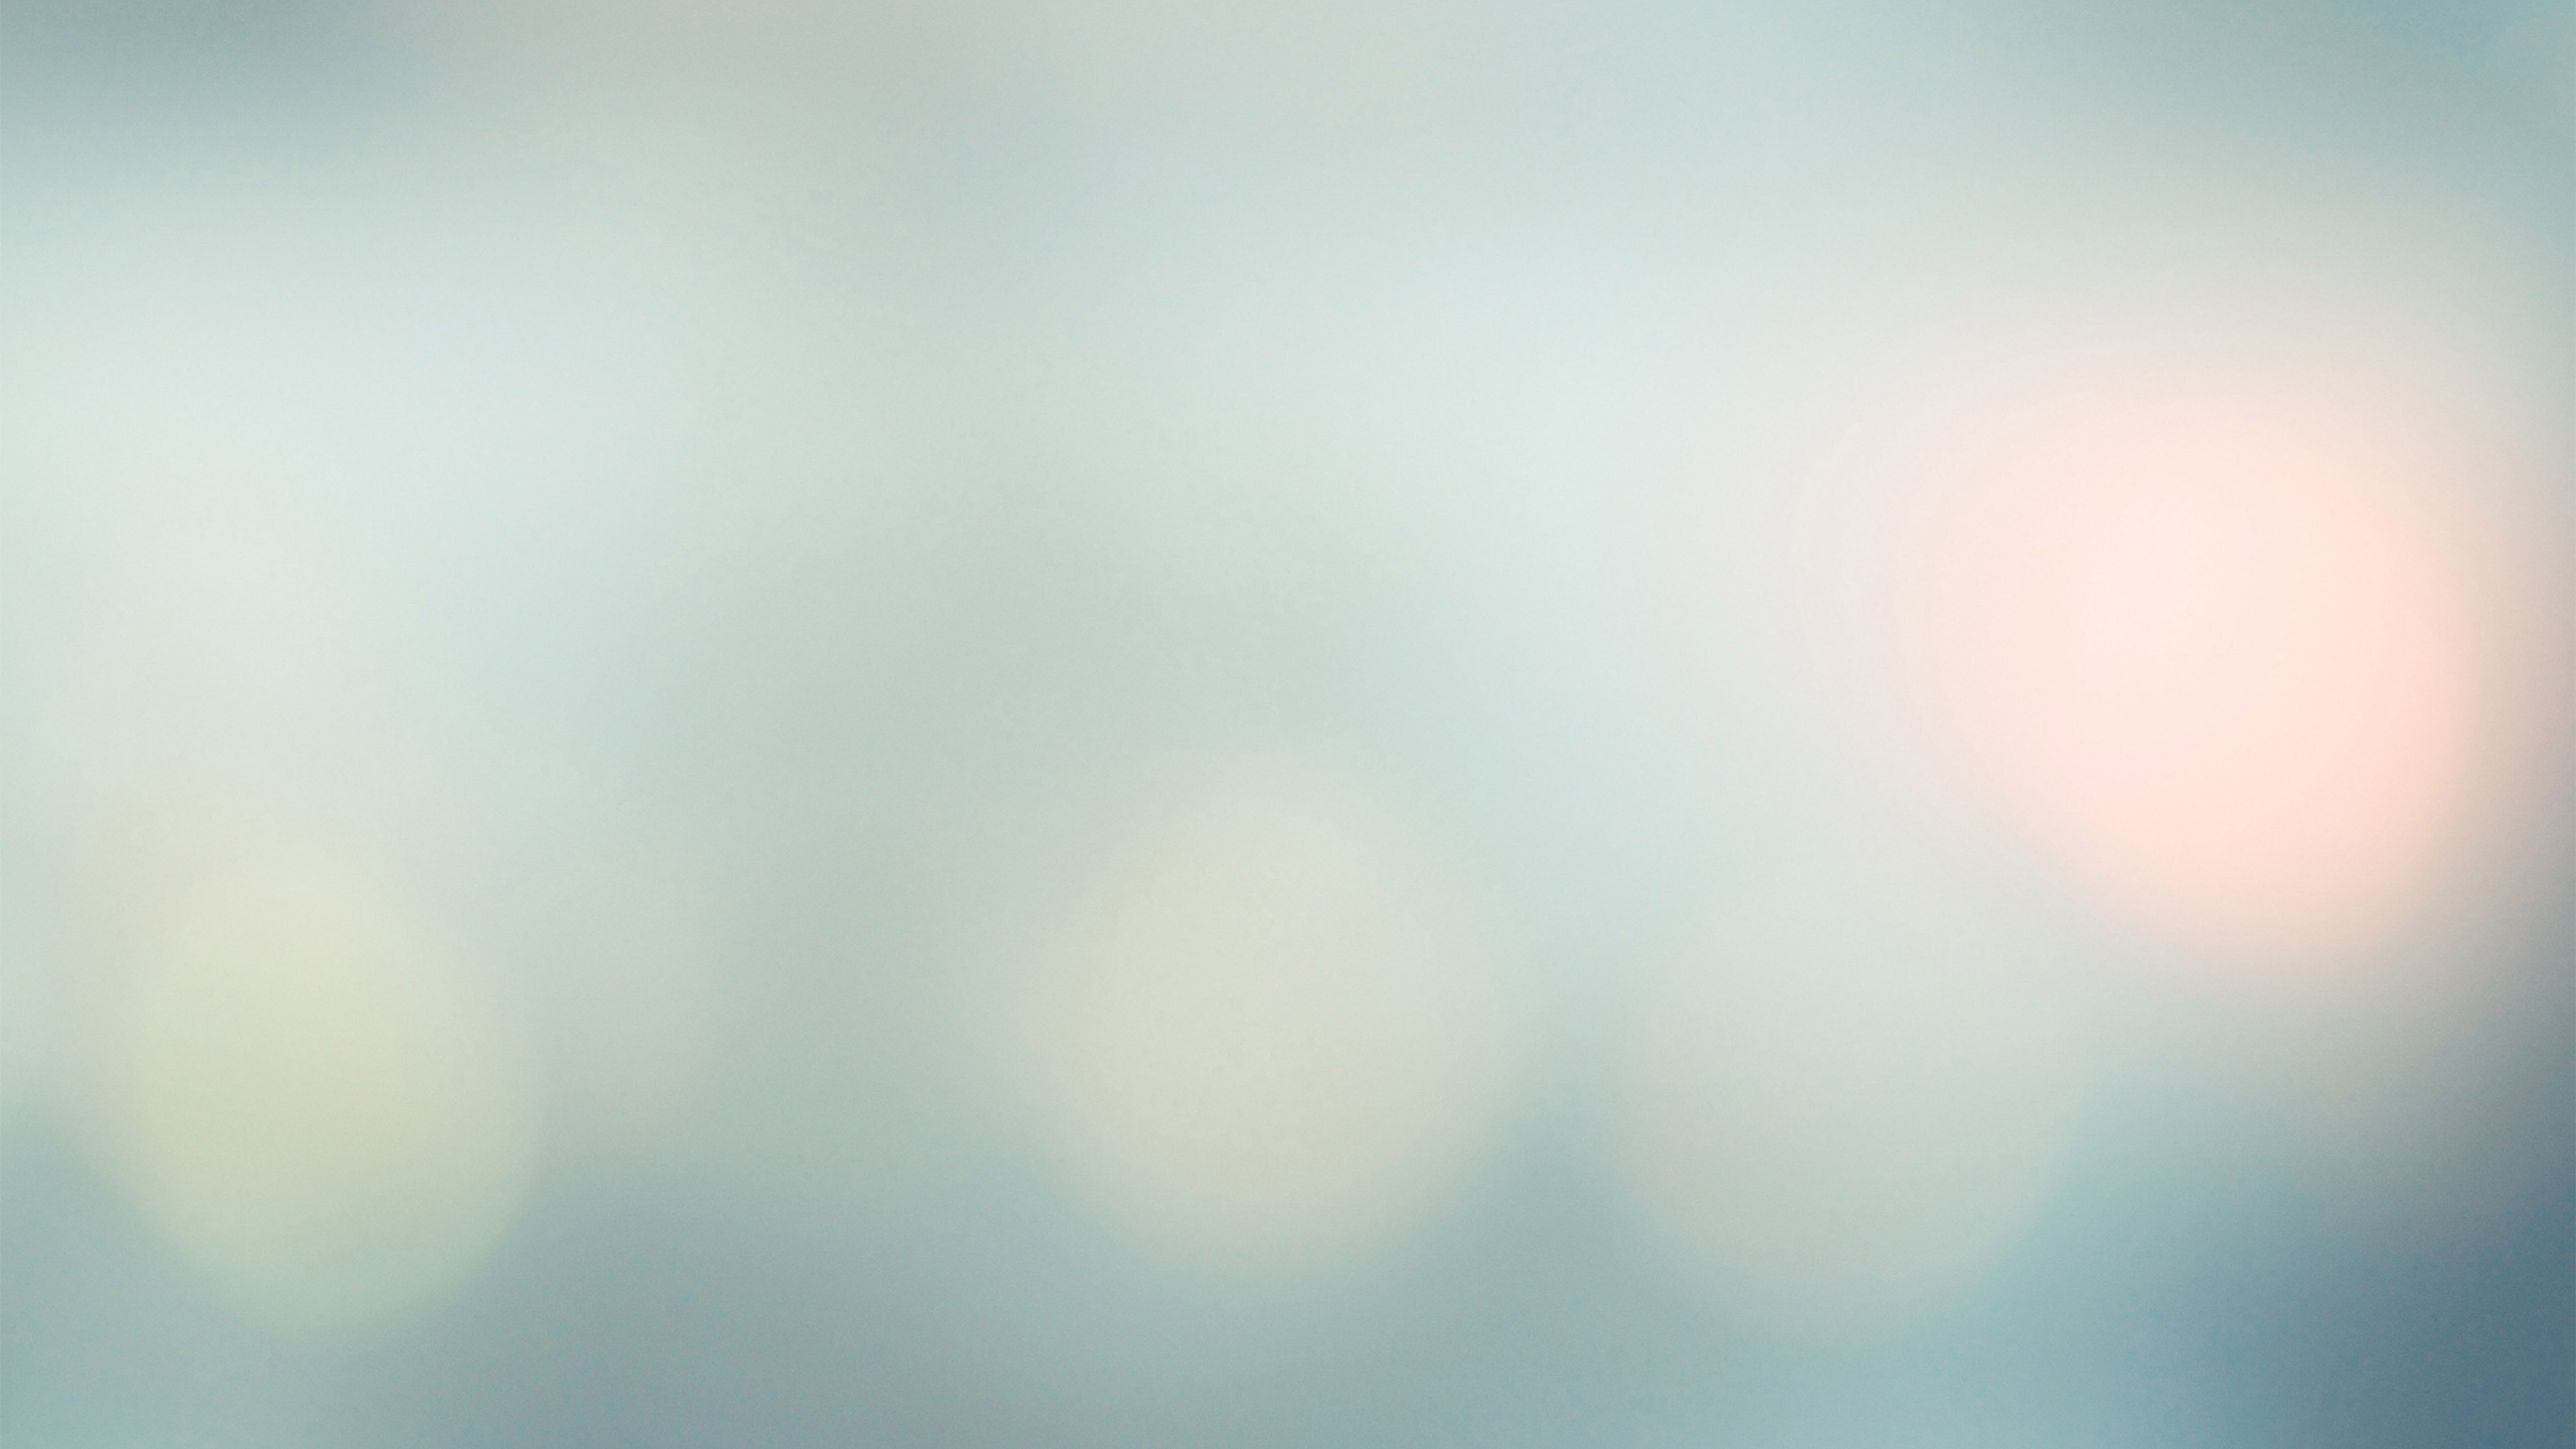 Blur Background Download Free Stunning Full HD Wallpapers For